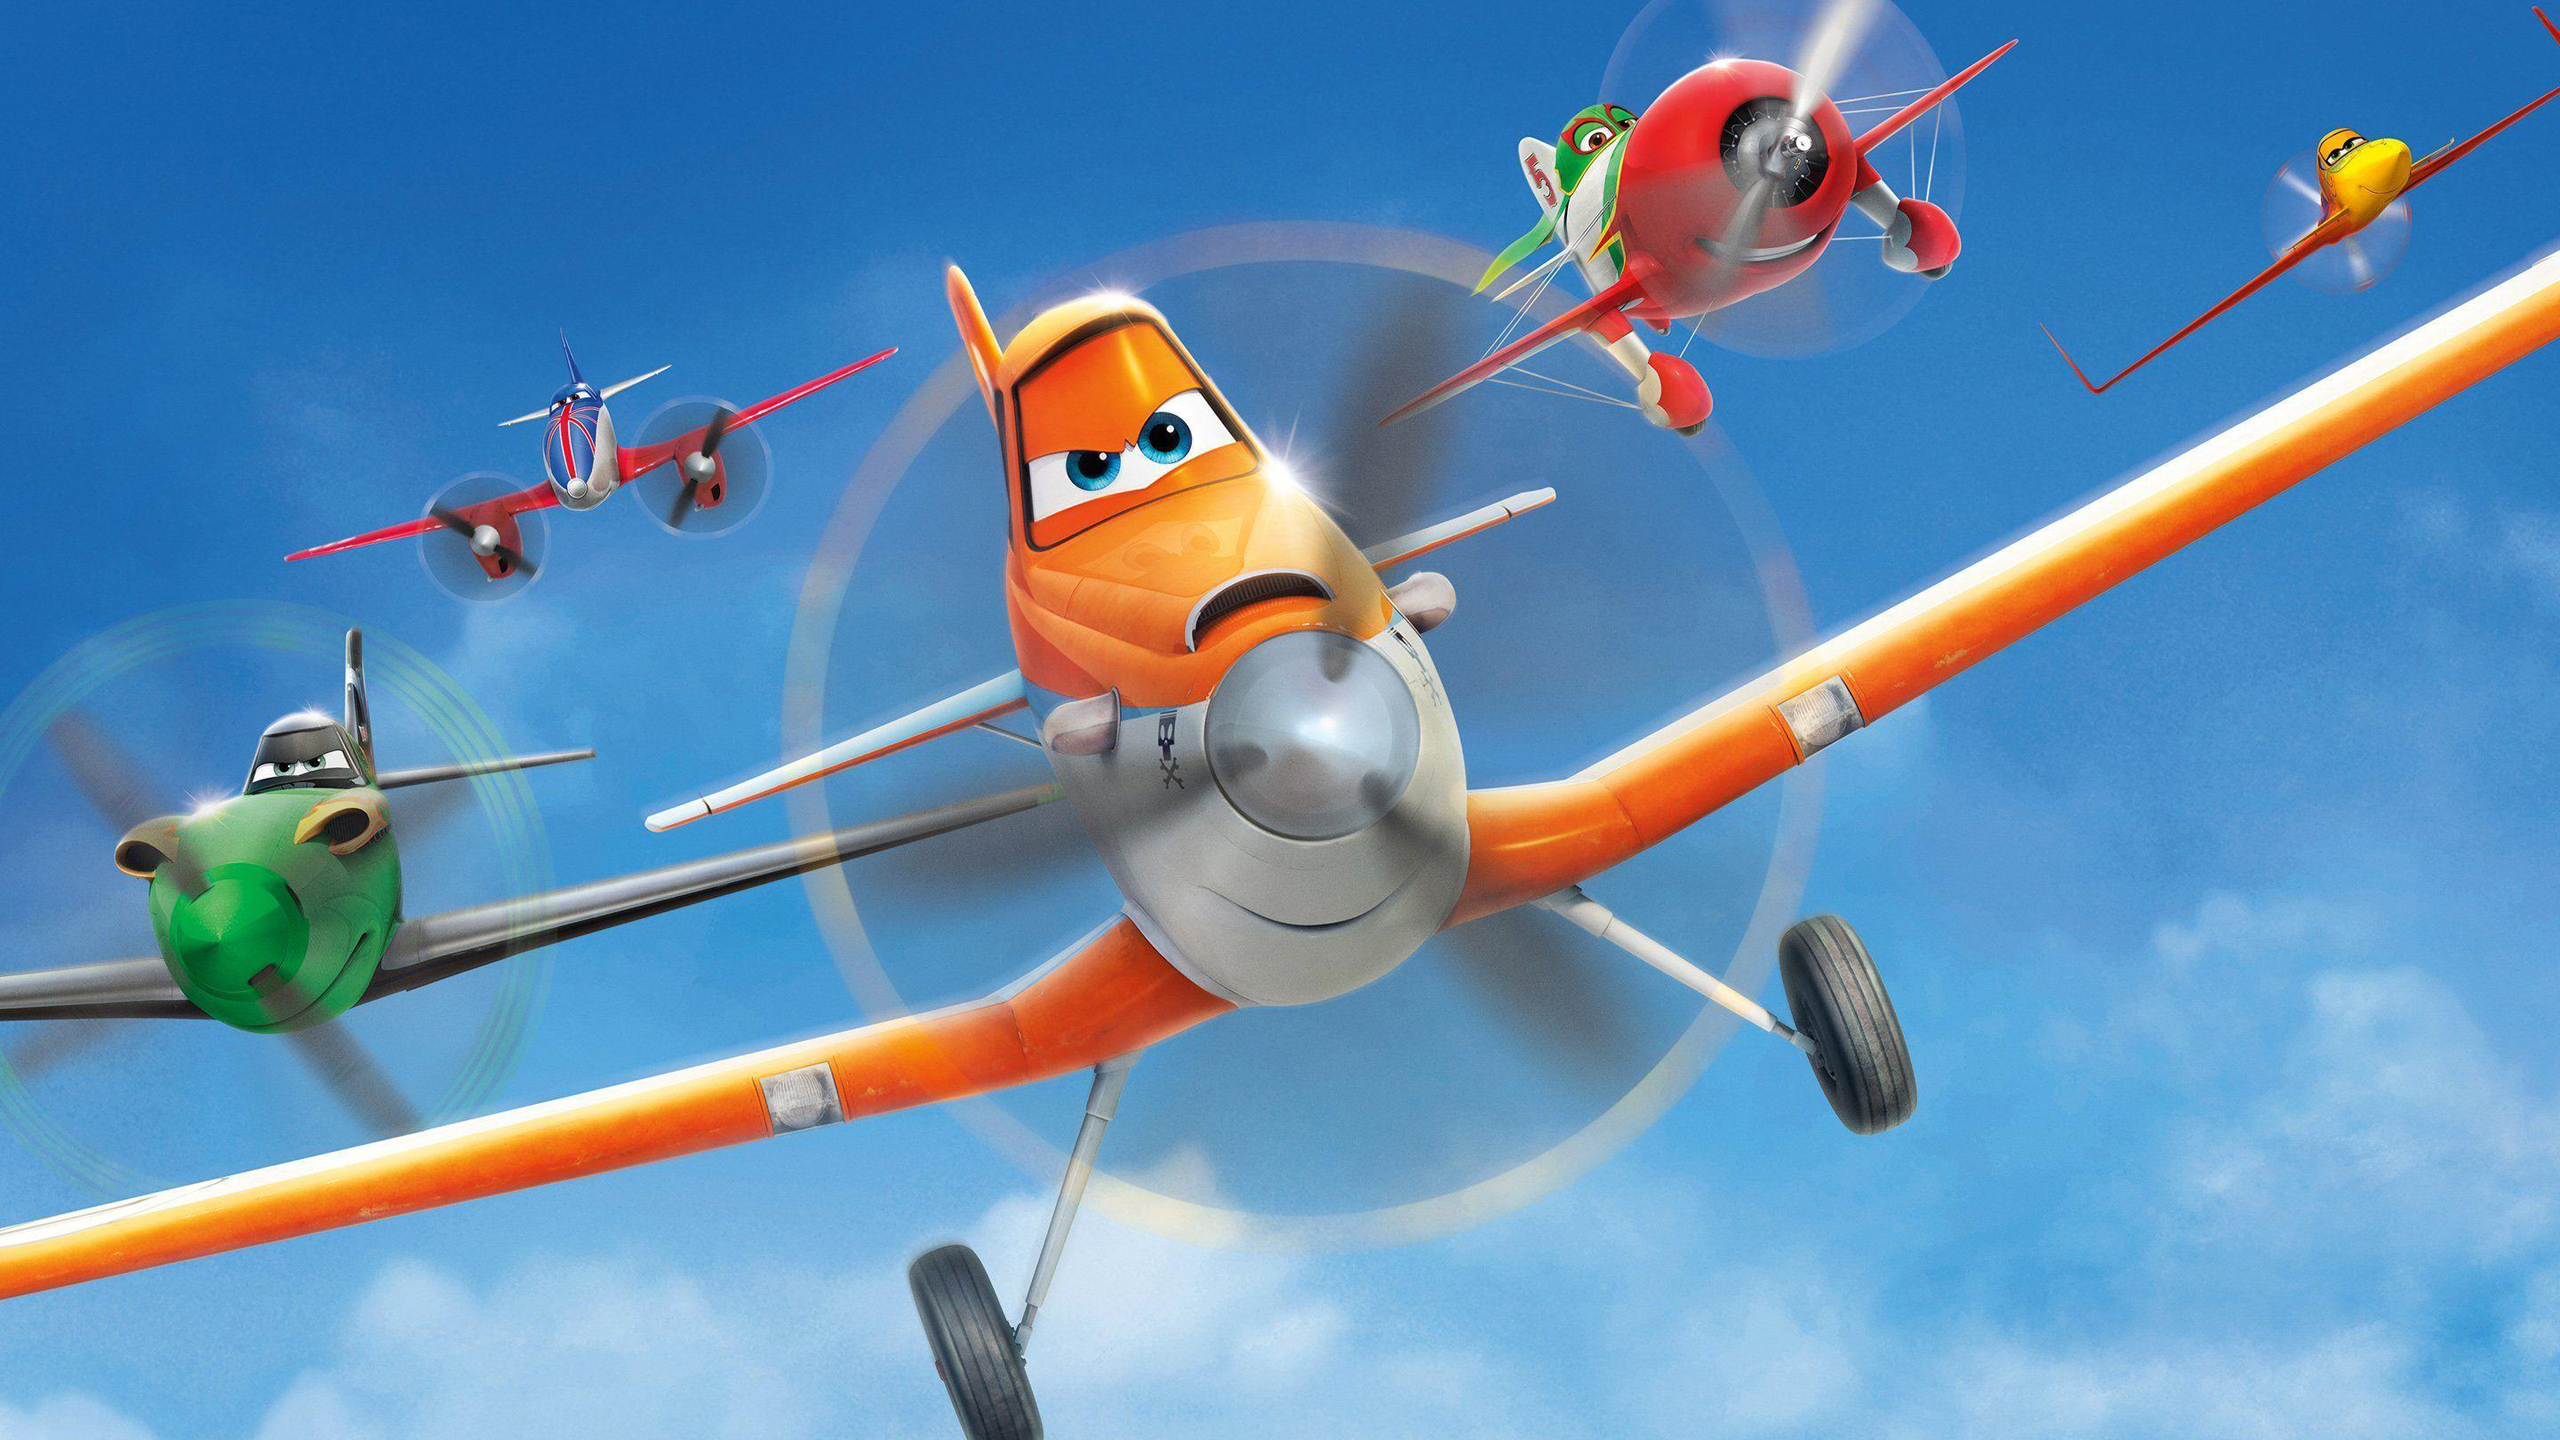 Planes With Blue Sky And Clouds Wallpaper 2K Disney